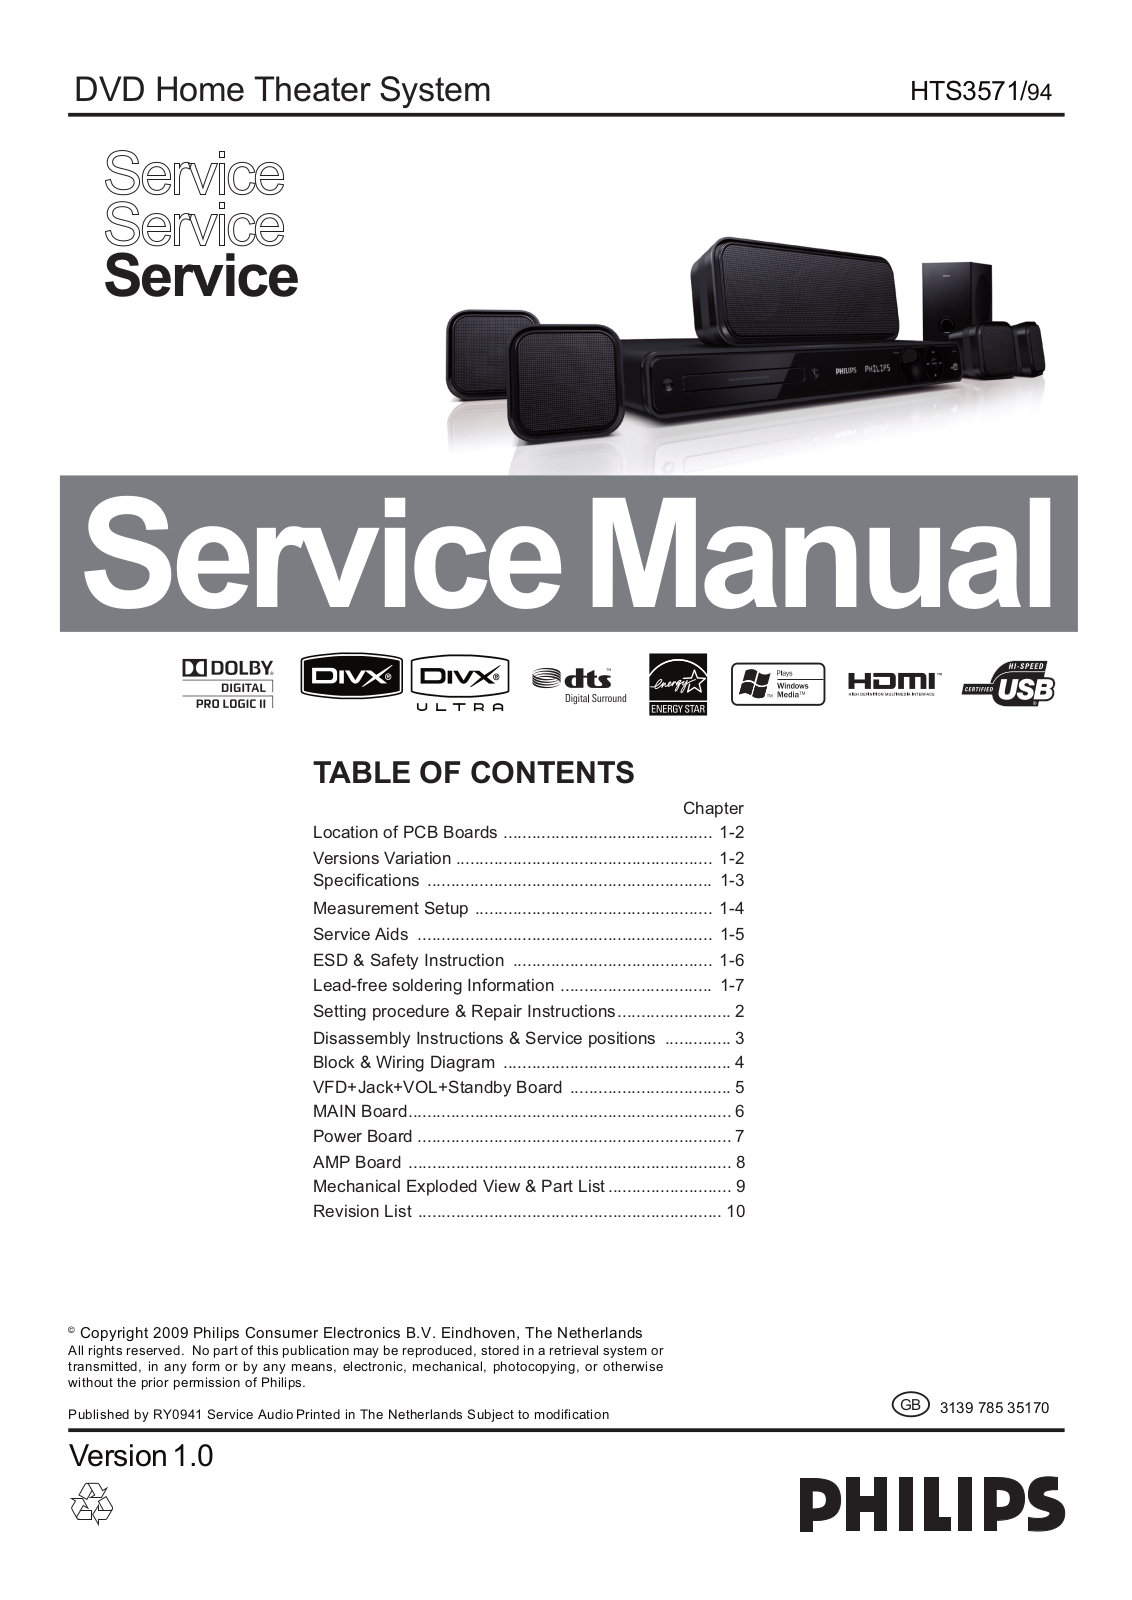 Philips HTS-3571 Service Manual